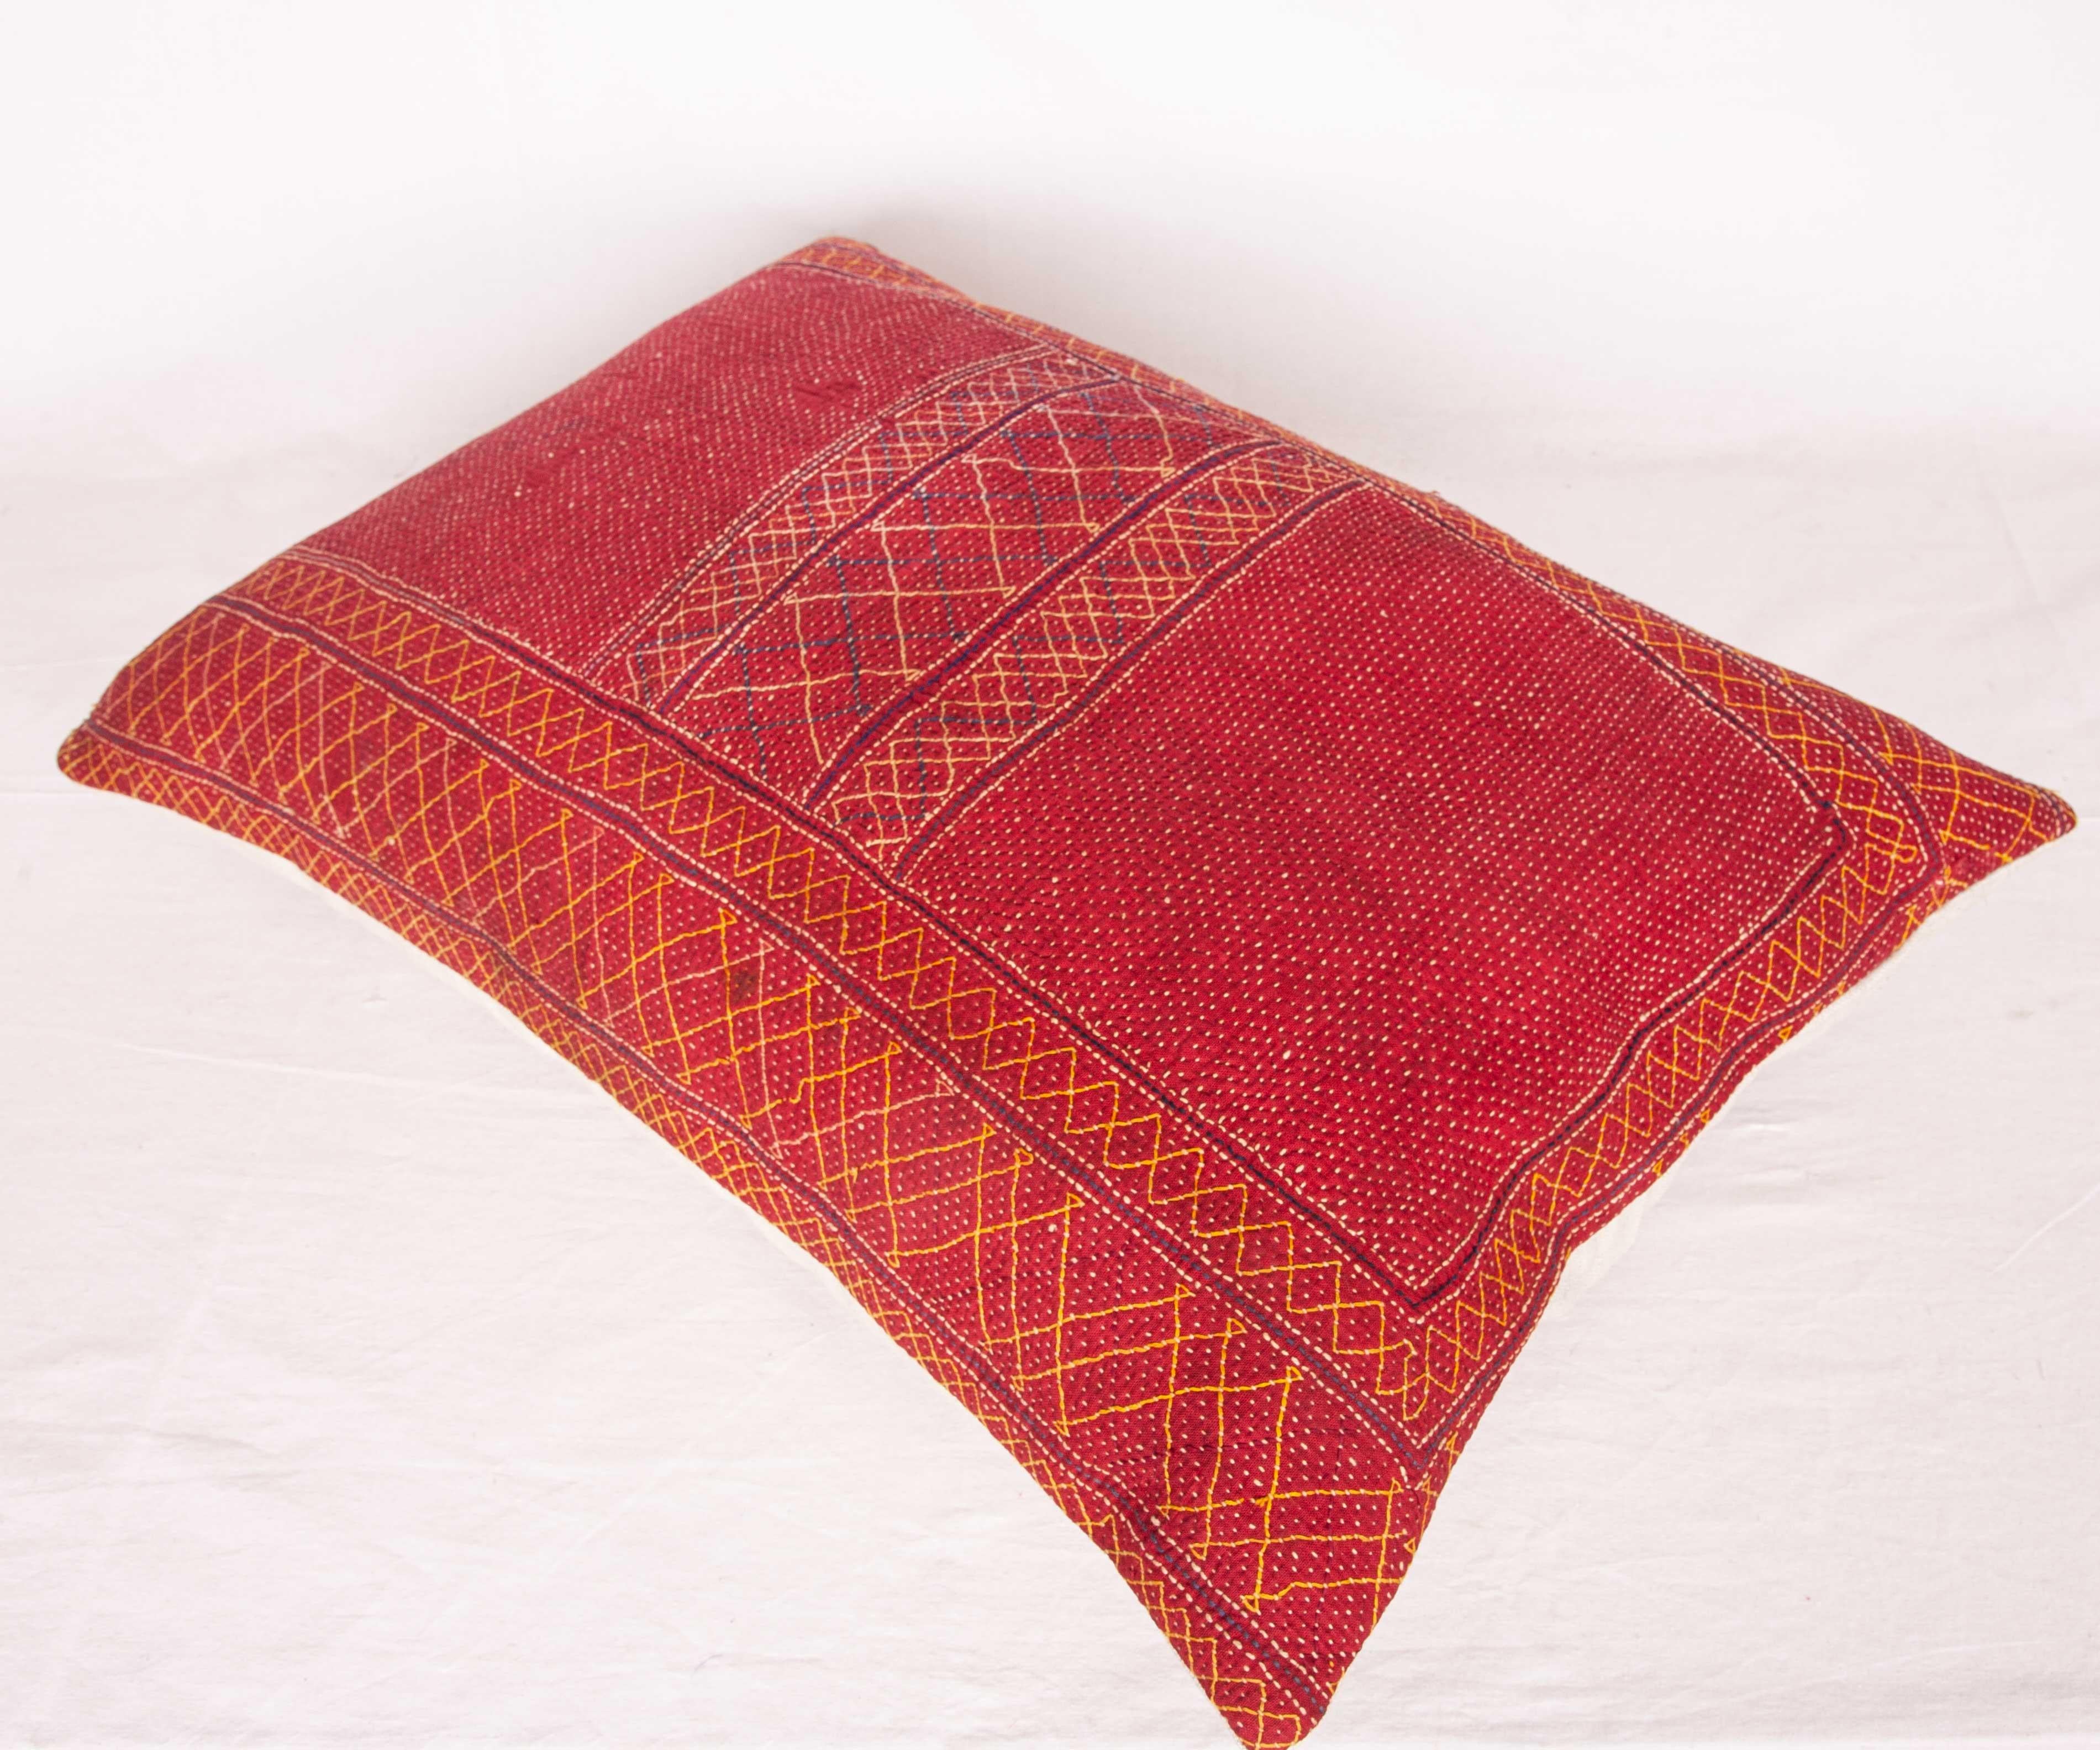 Quilted Old Banjara Quilt Cushion / Pillow Caseq, Early 20th Century For Sale